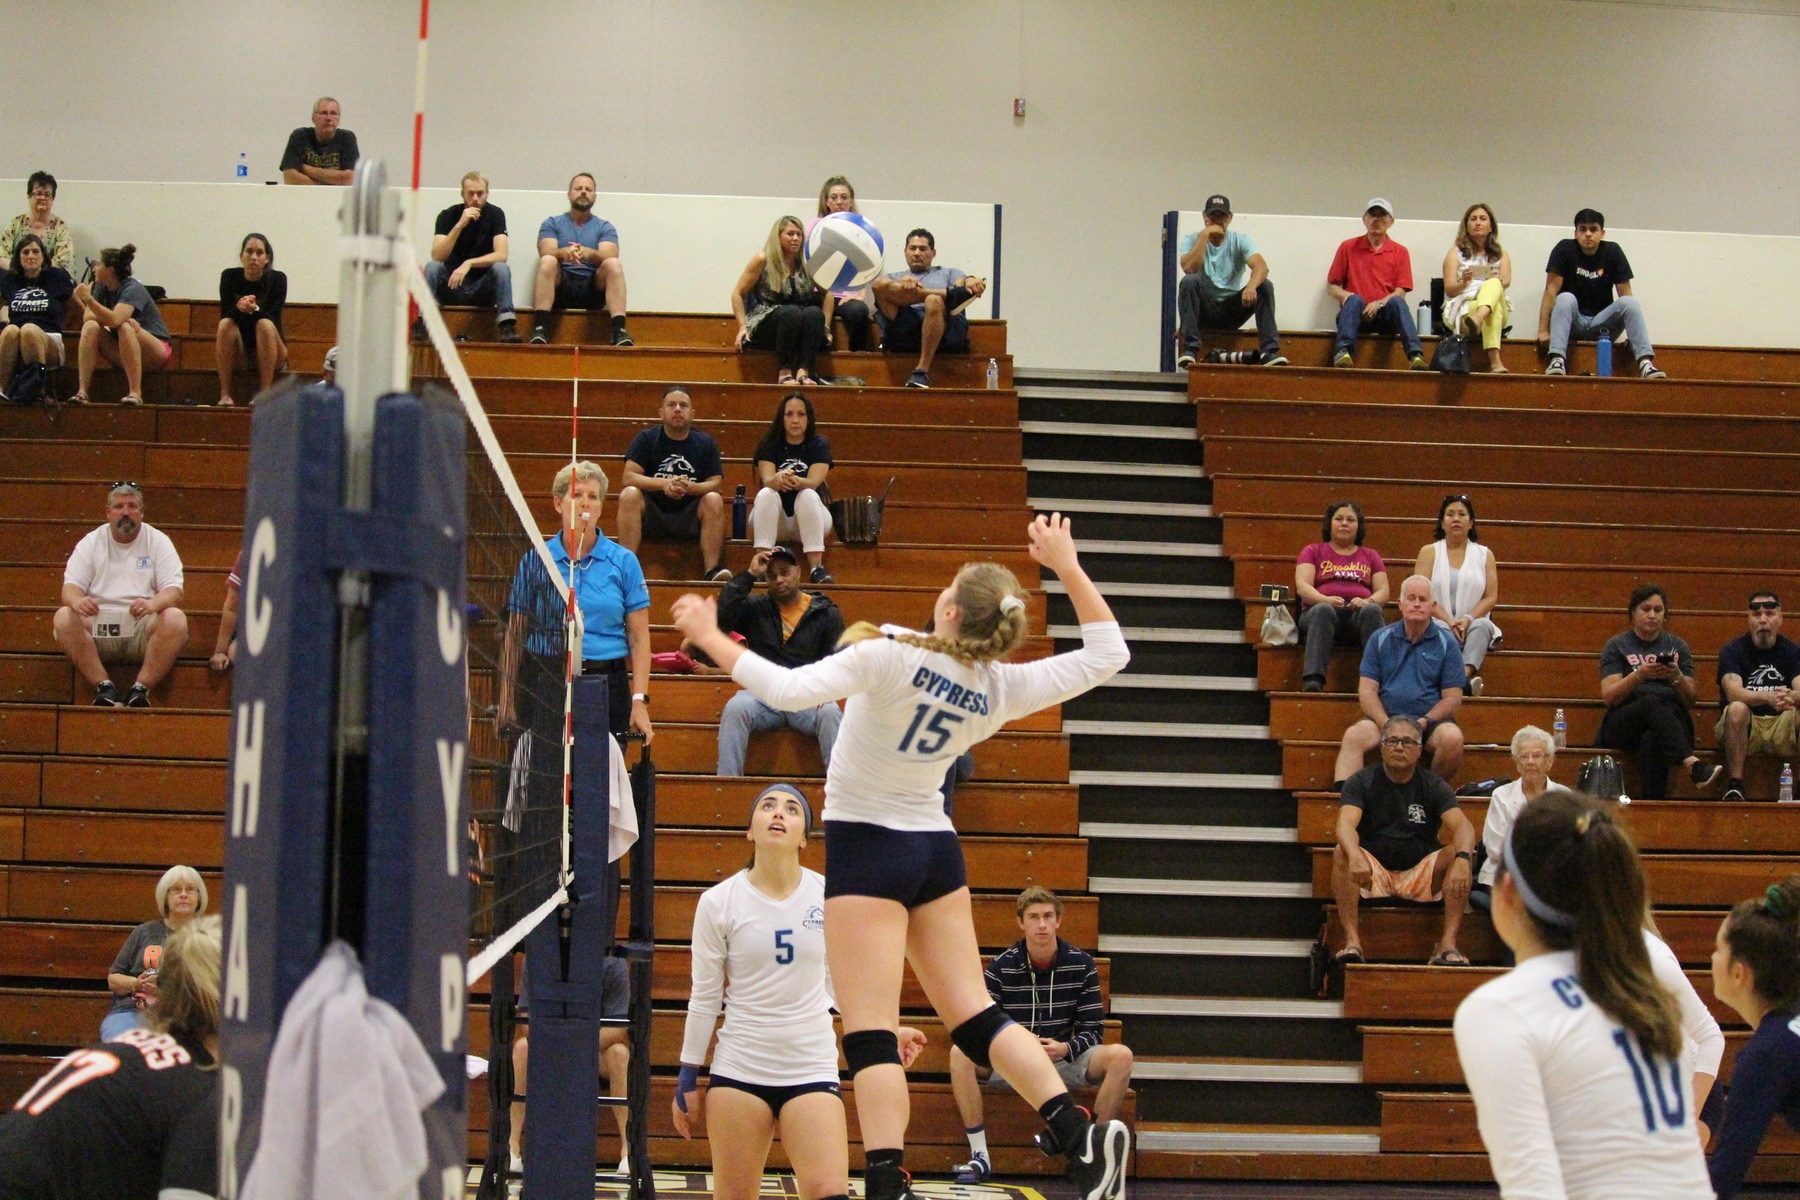 Women's Volleyball, Mary Hicks, Commits to San Diego Christian College